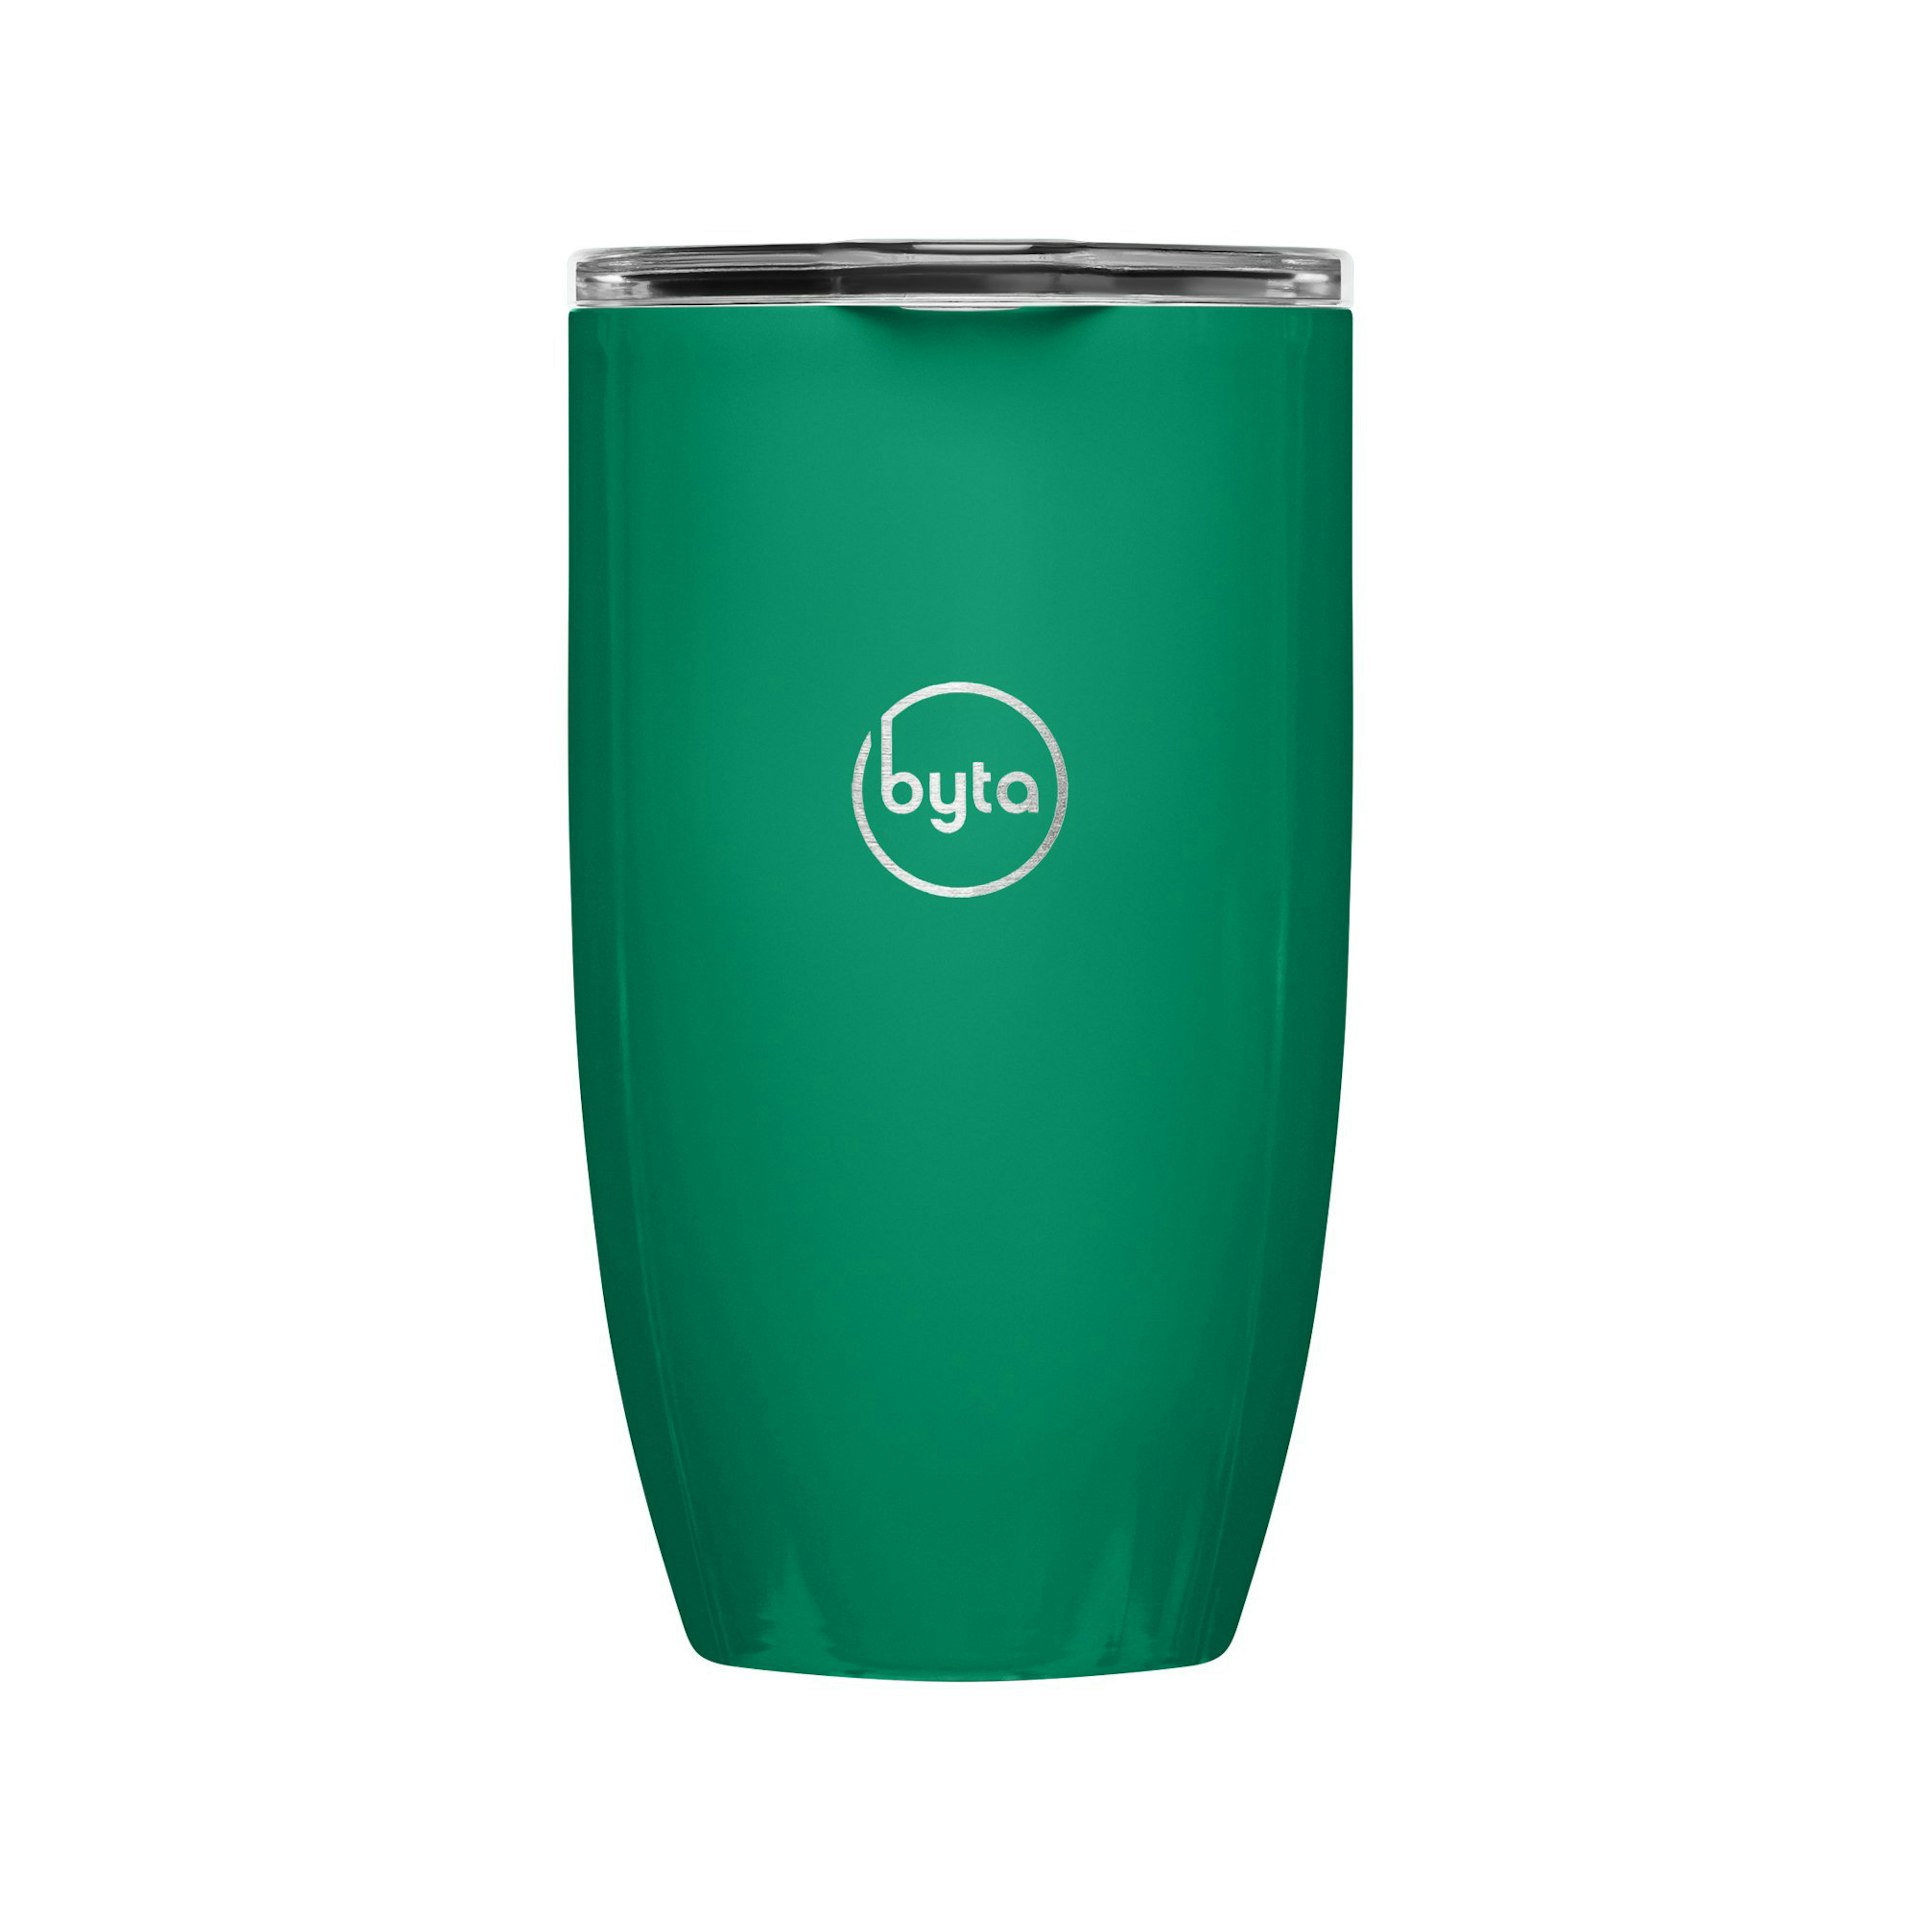 An emerald green stainless steel tumbler from Byta